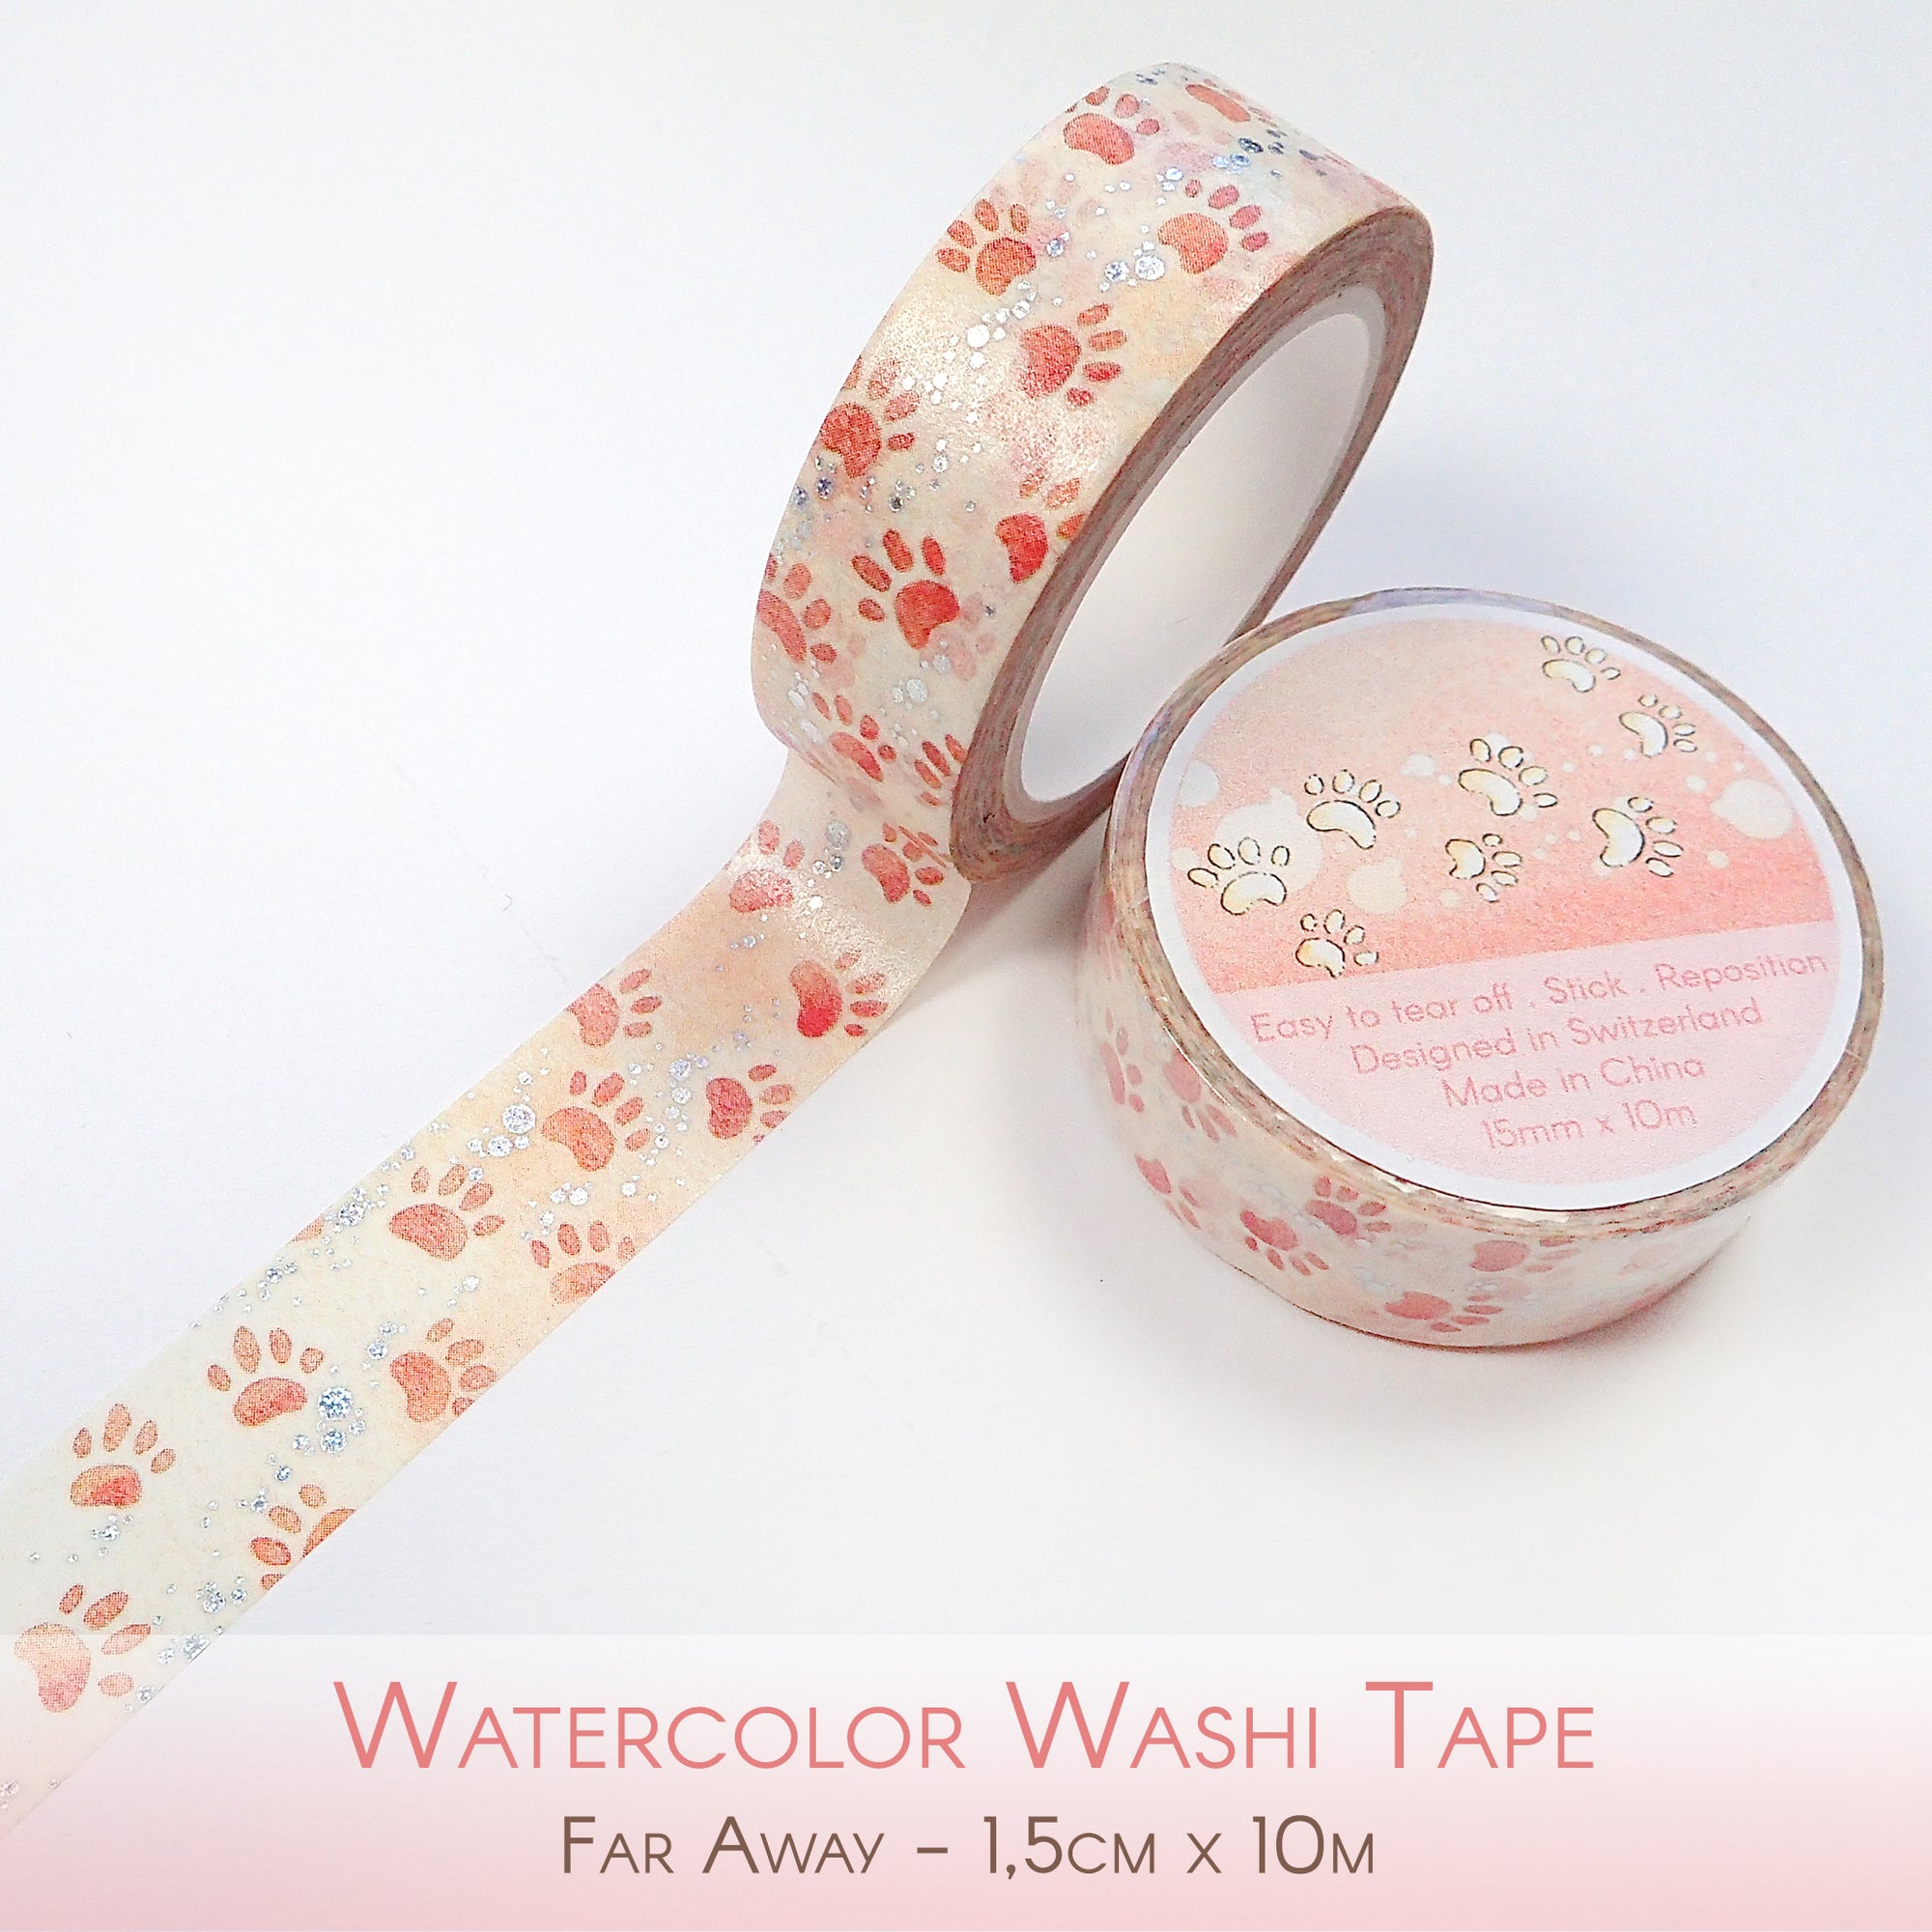 Pink watercolor washi tapes with paws pattern